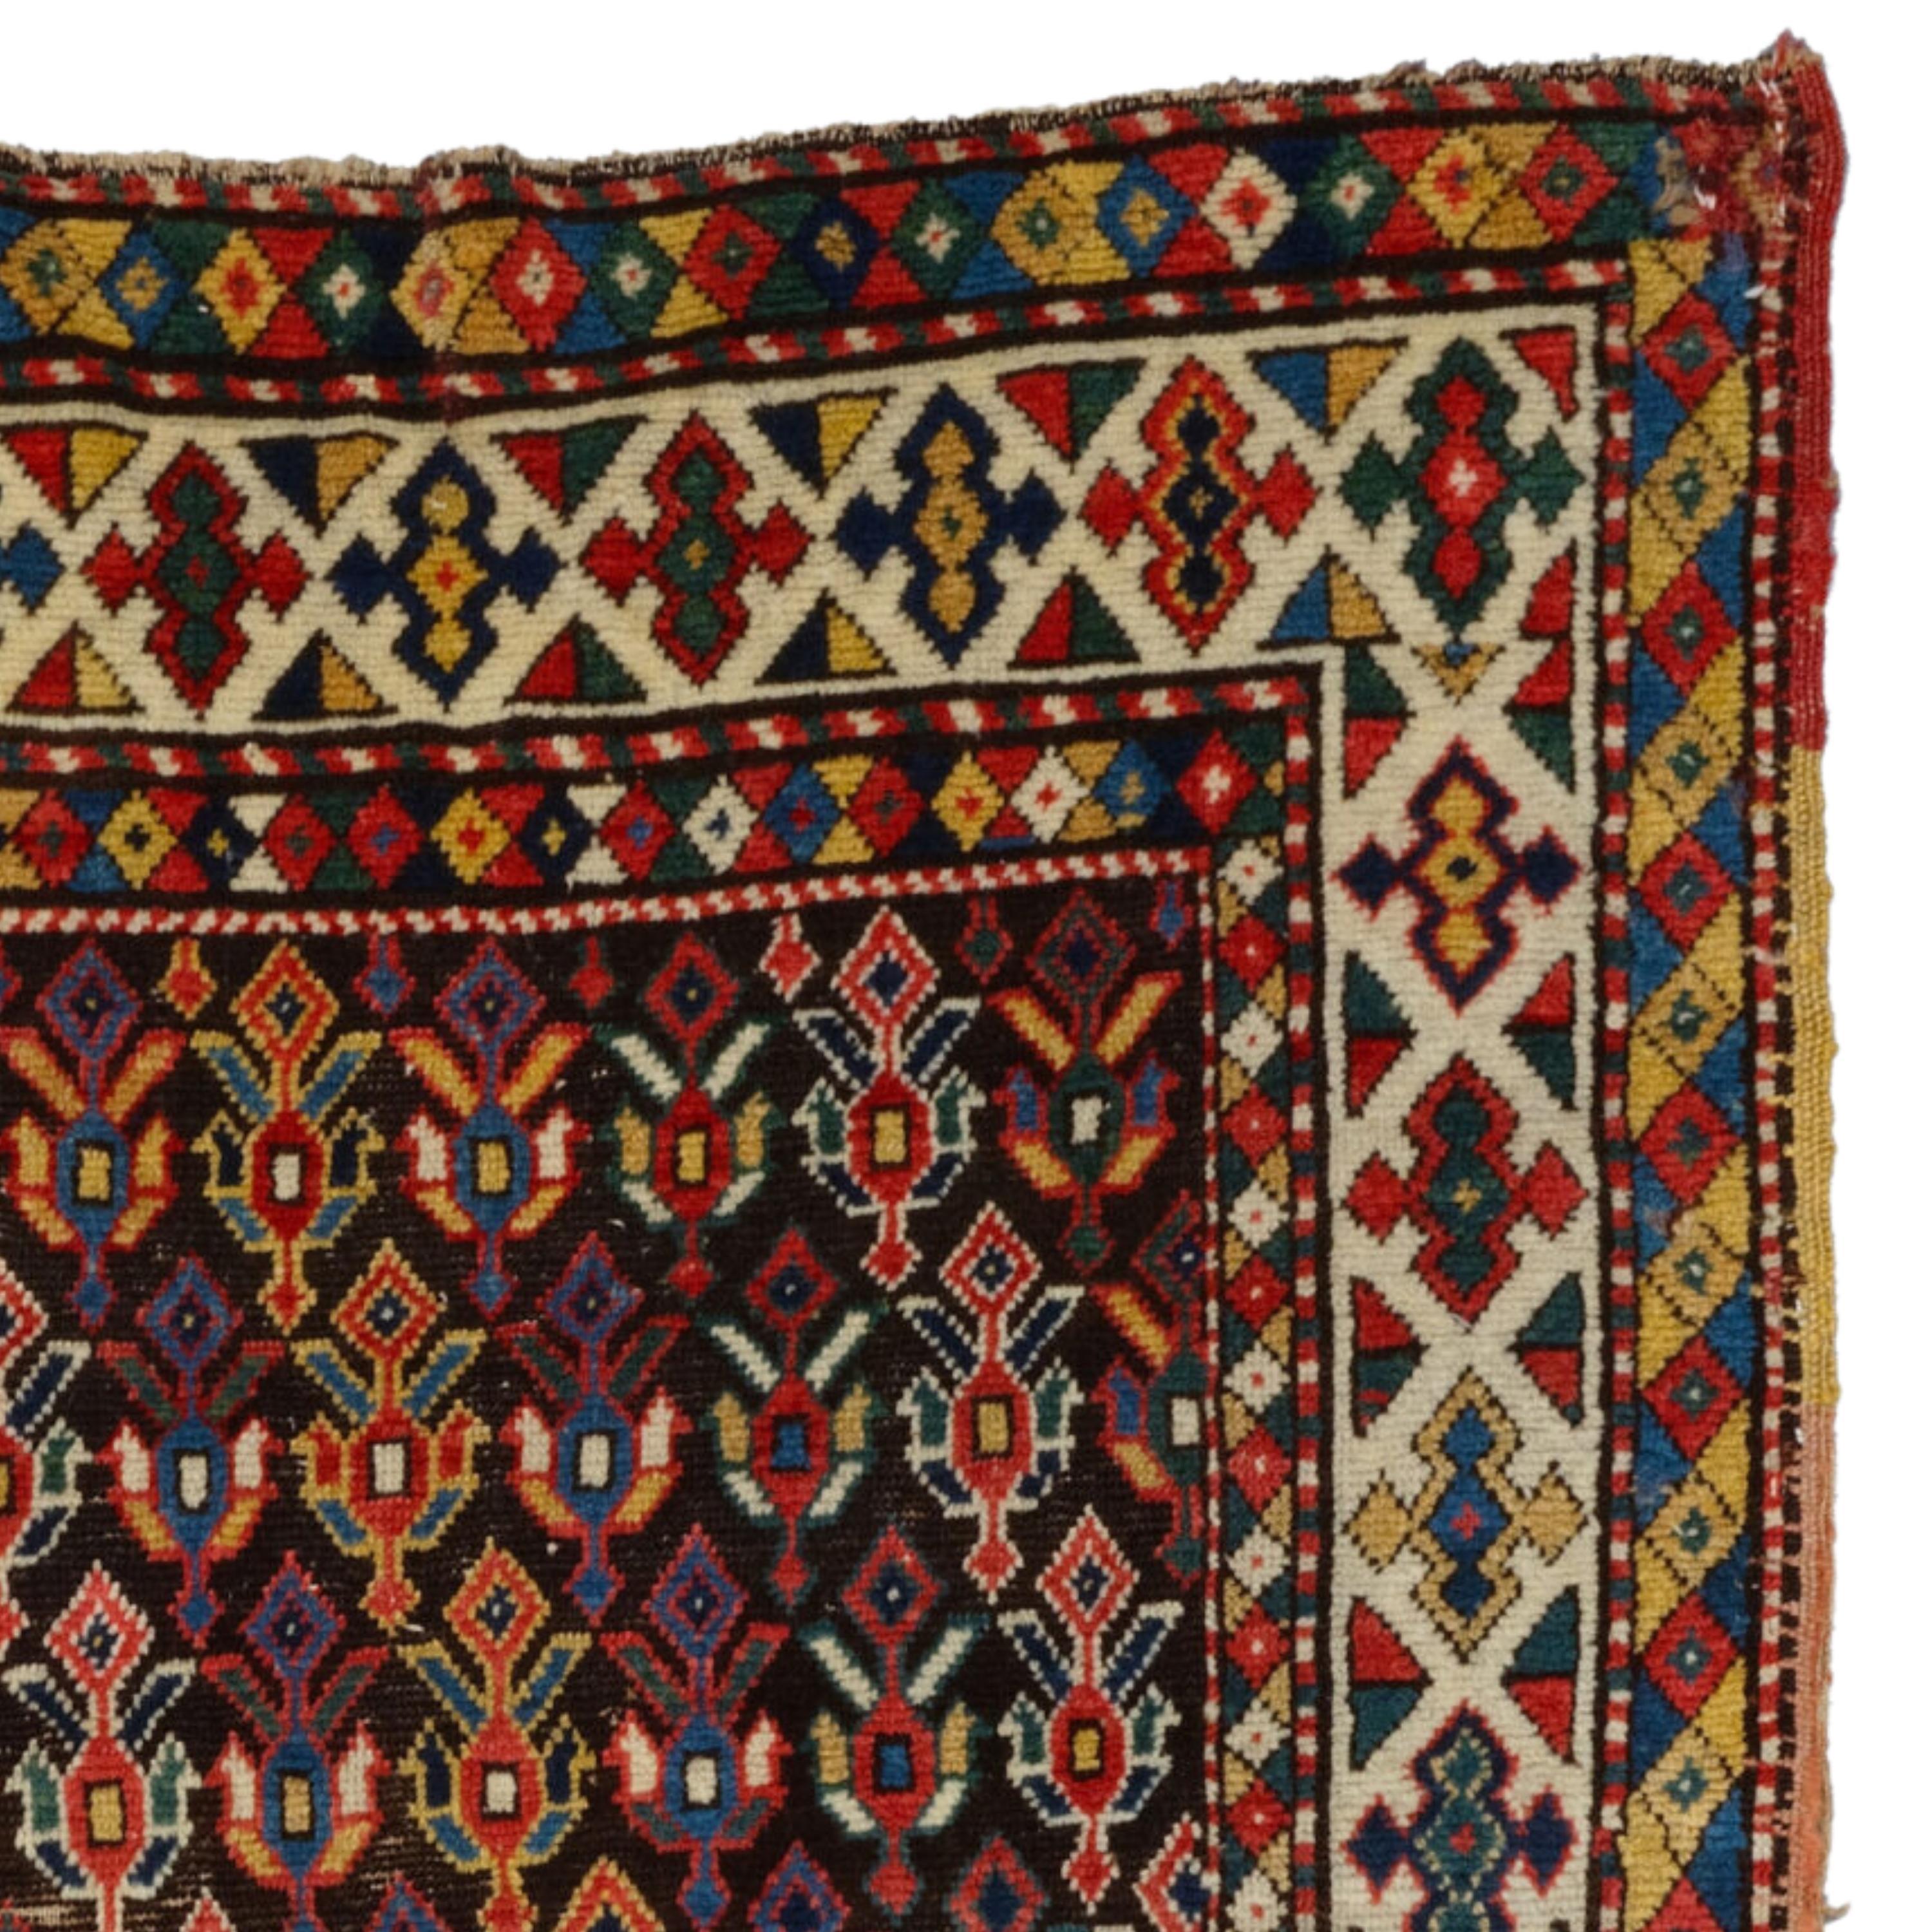 Wool Antique Caucasian Rug - Late Of The 19th Century Caucasian Rug, Antique Rug For Sale